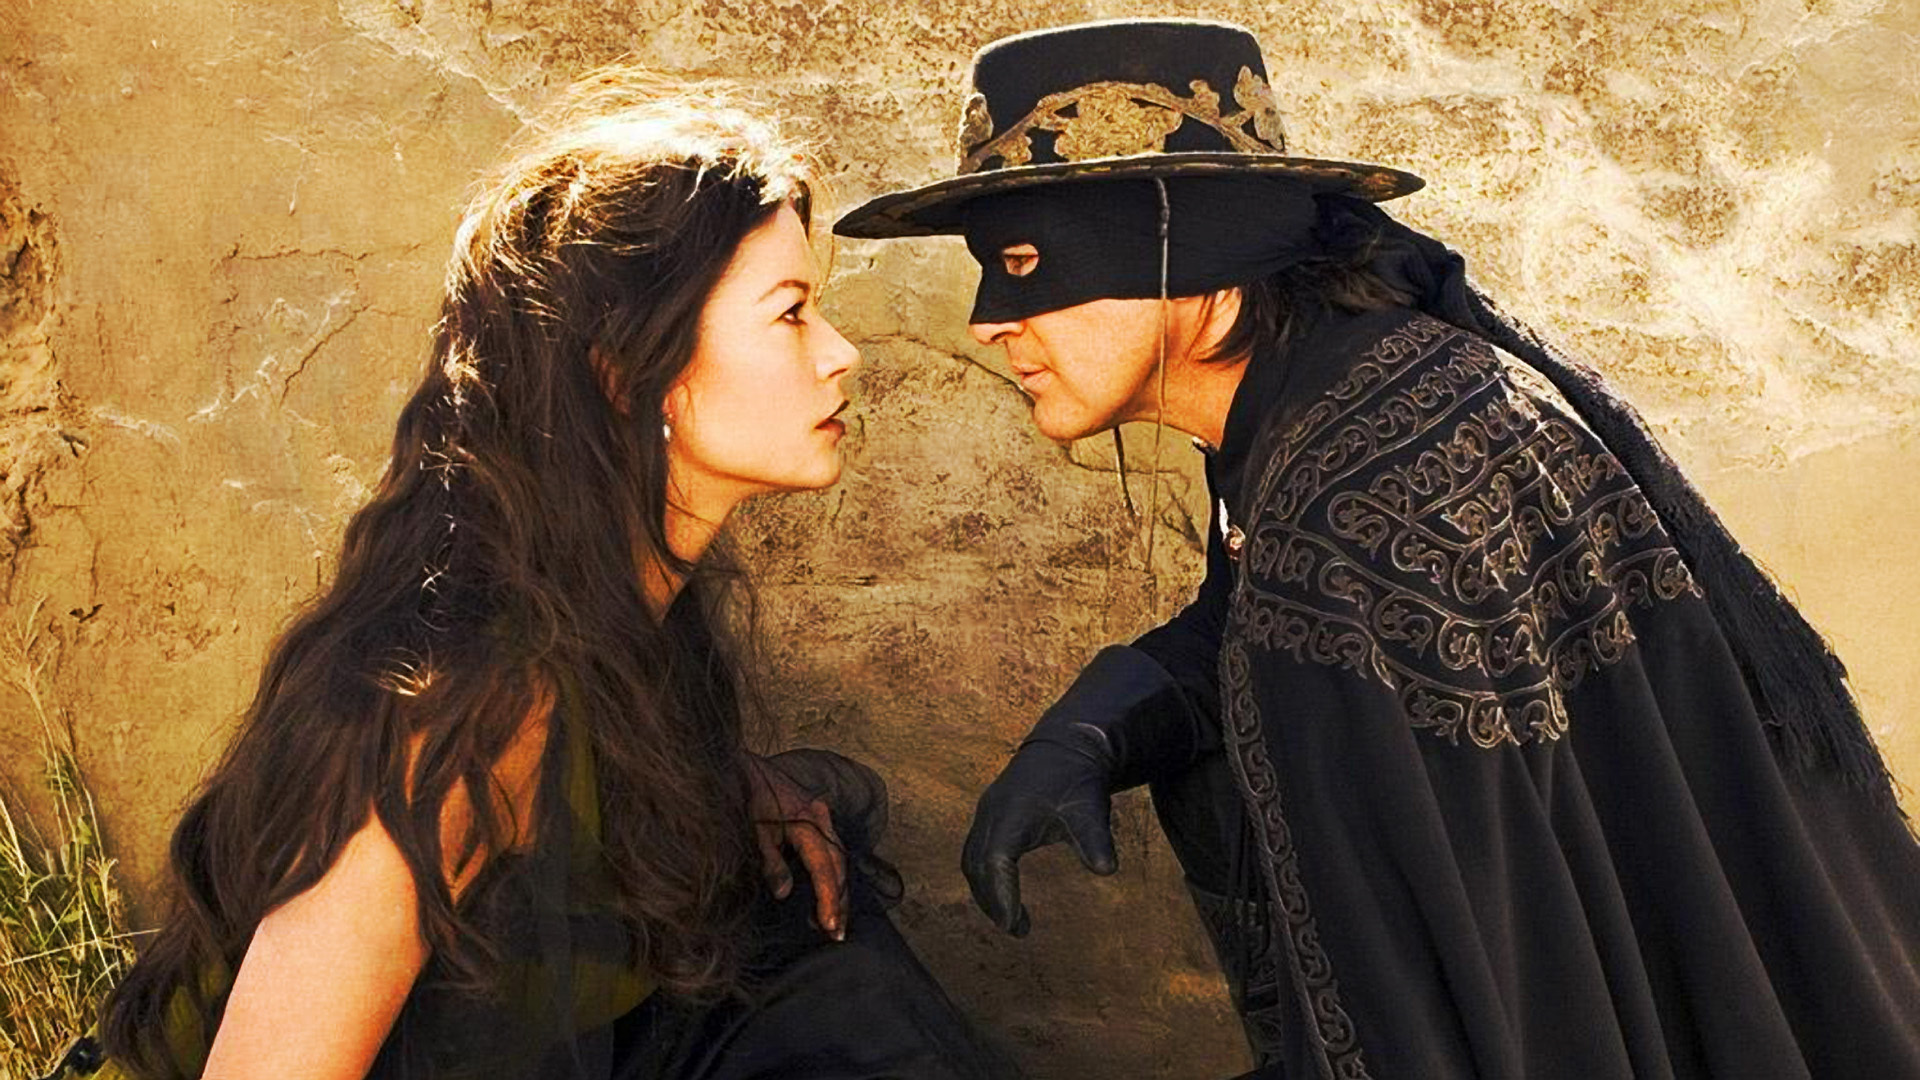 Adventure Film, Action Adventure, Interaction, Girl, - Mask Of Zorro Hd , HD Wallpaper & Backgrounds